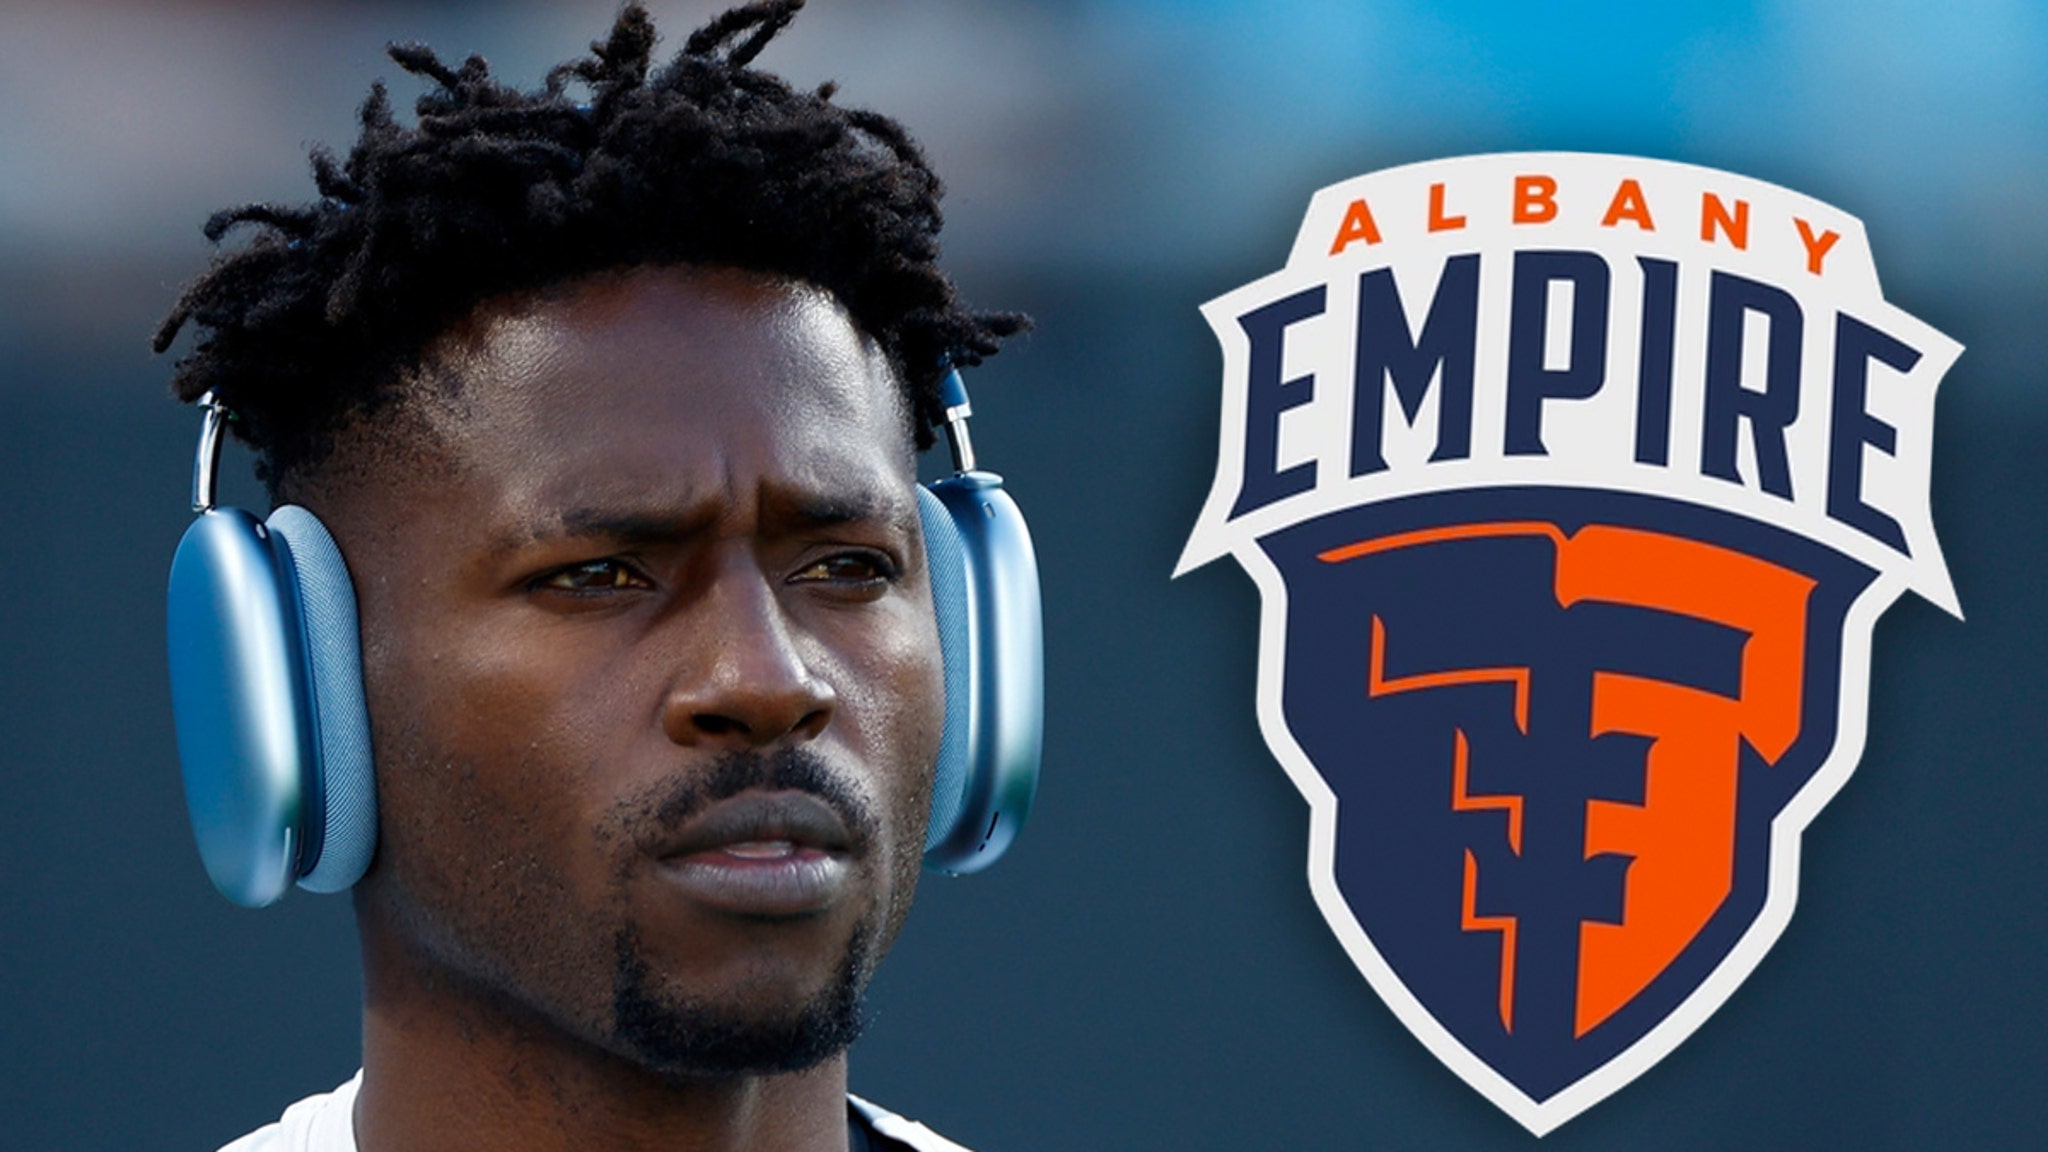 Antonio Brown accused of threatening Arena League coach and failing to pay players